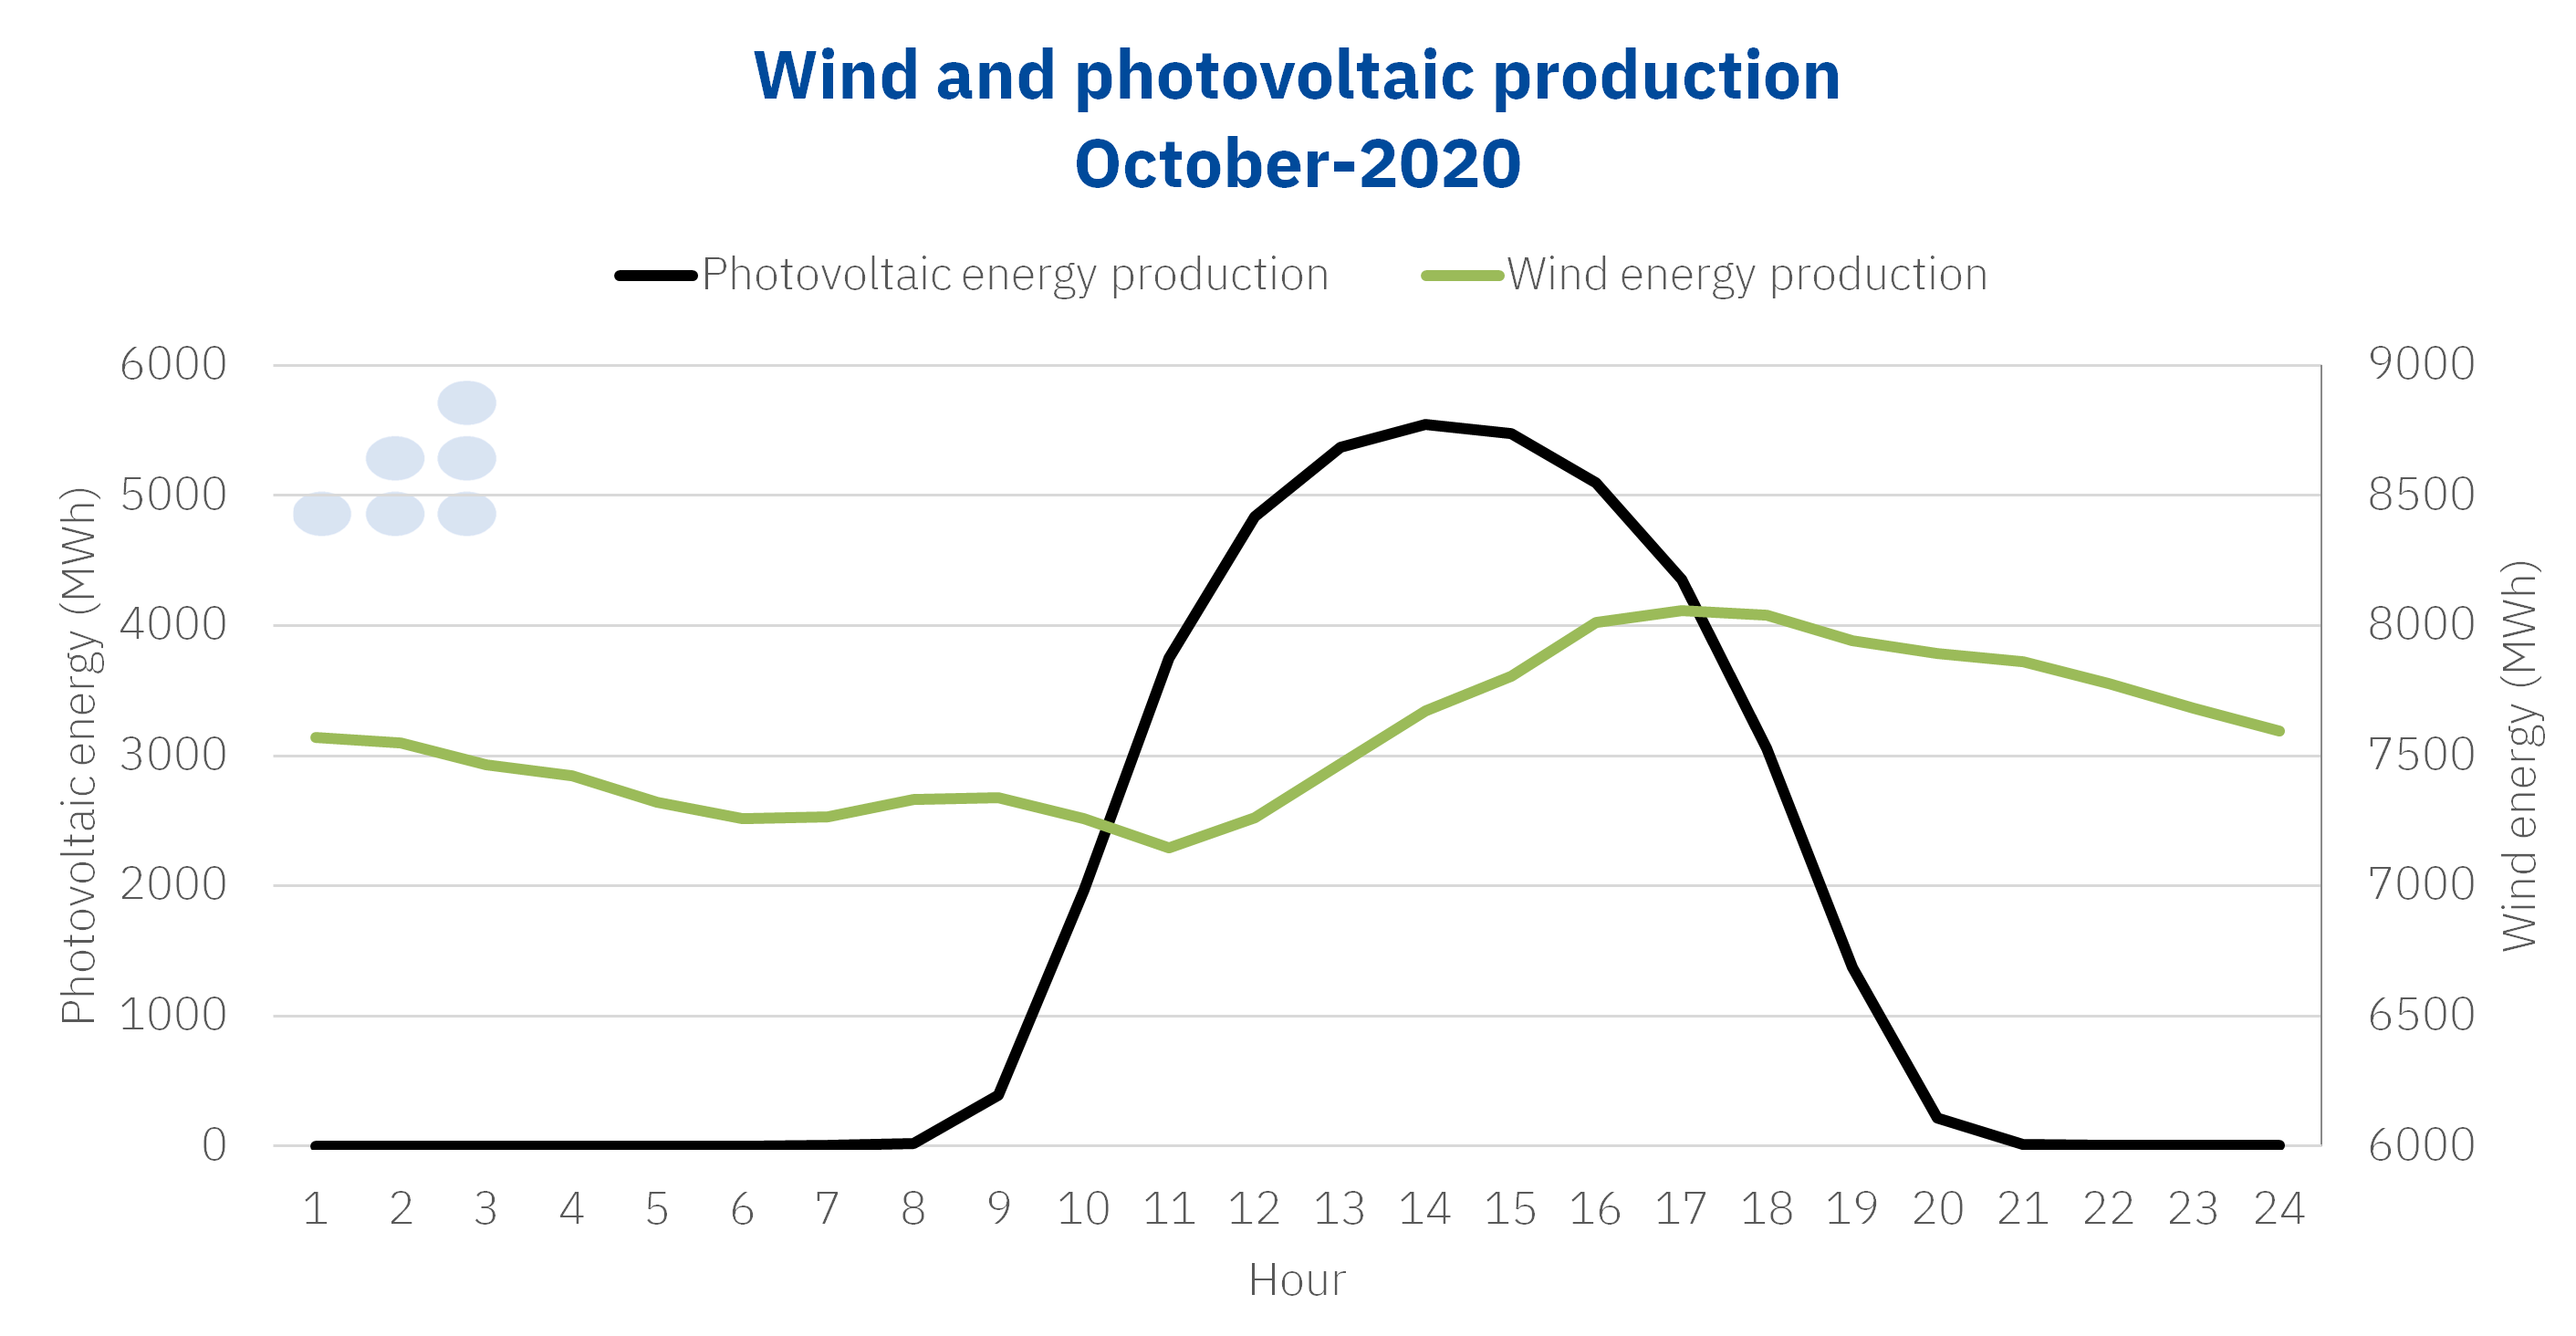 AleaSoft - Wind photovoltaic production profile october